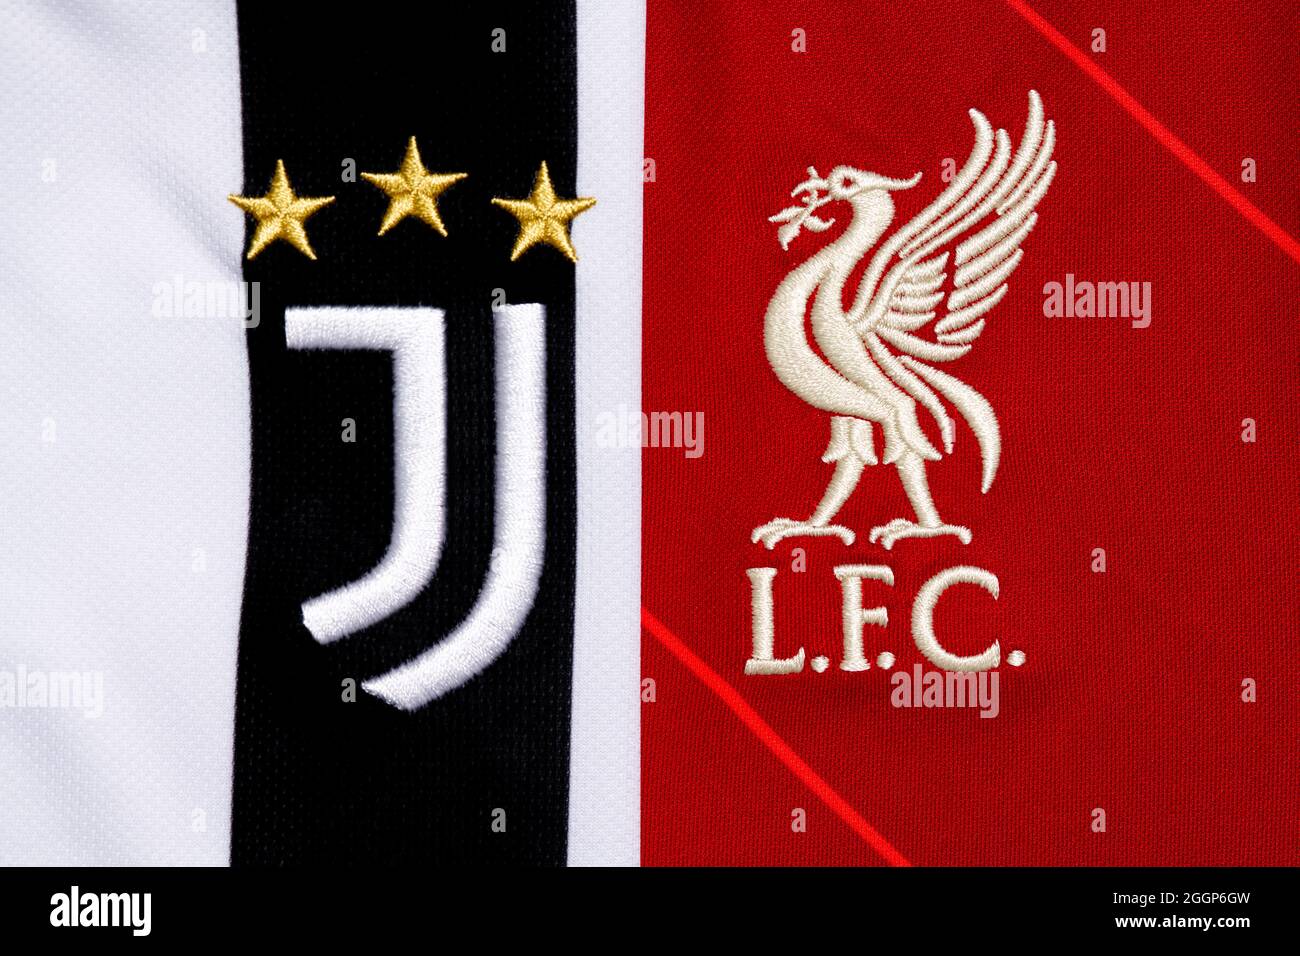 Close up of Liverpool and Juventus club crest. Stock Photo